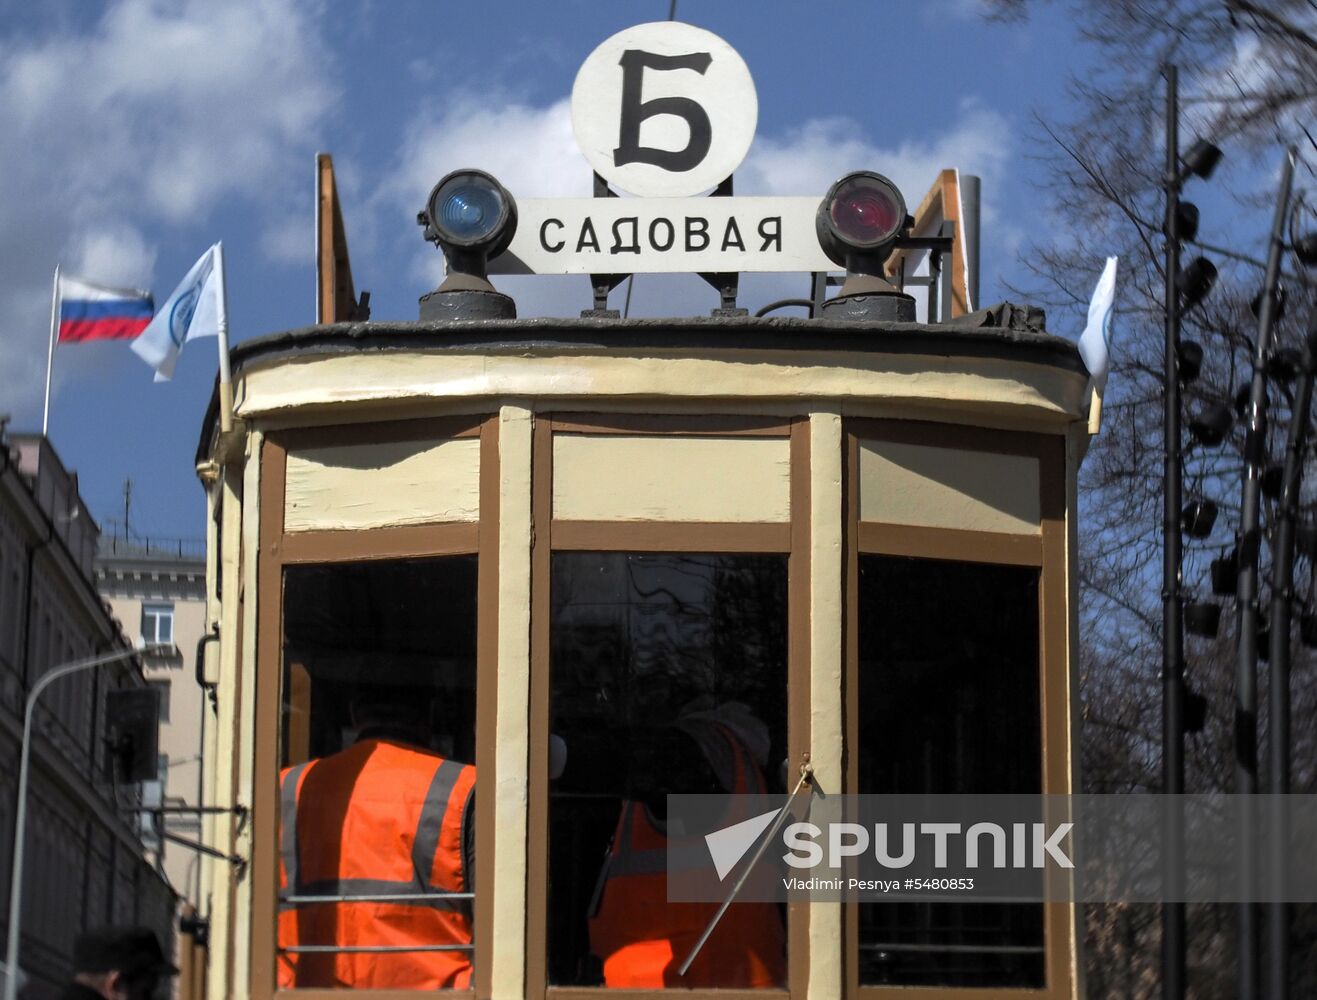 Streetcar parade in Moscow